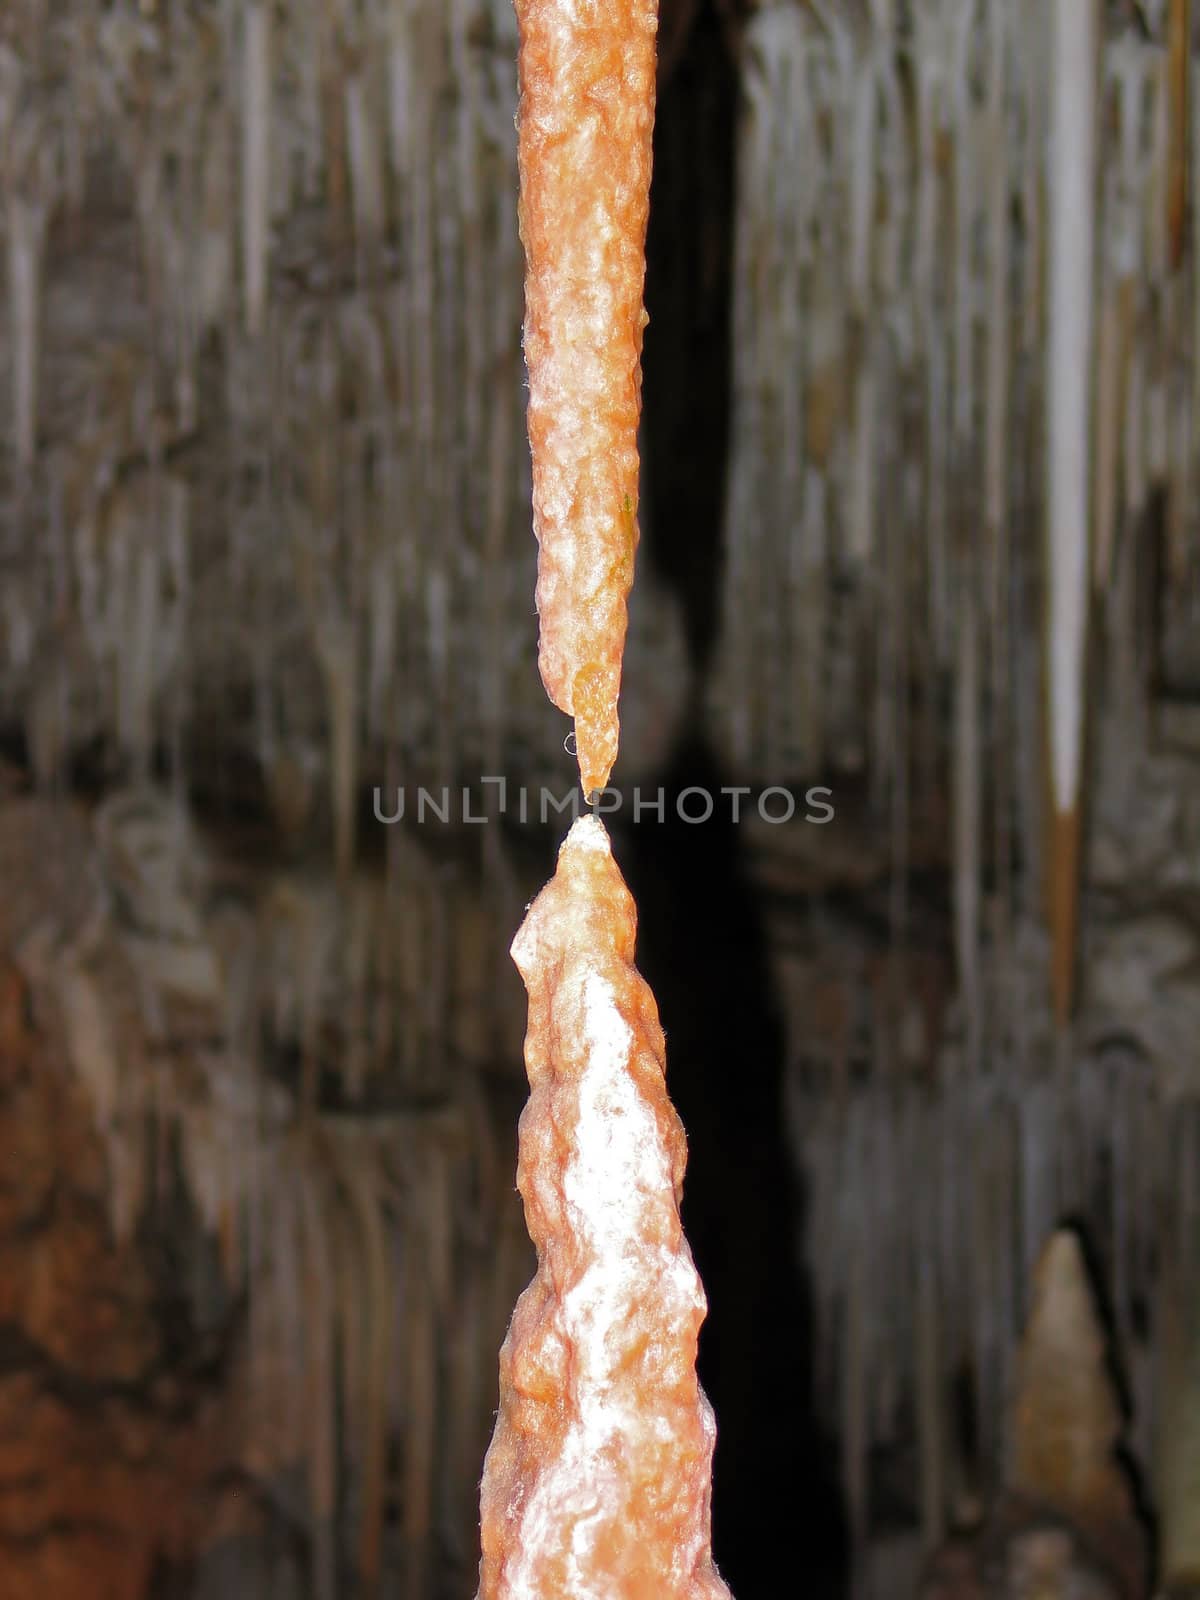 Formation of Stalactite and stalagmite  by Ronyzmbow